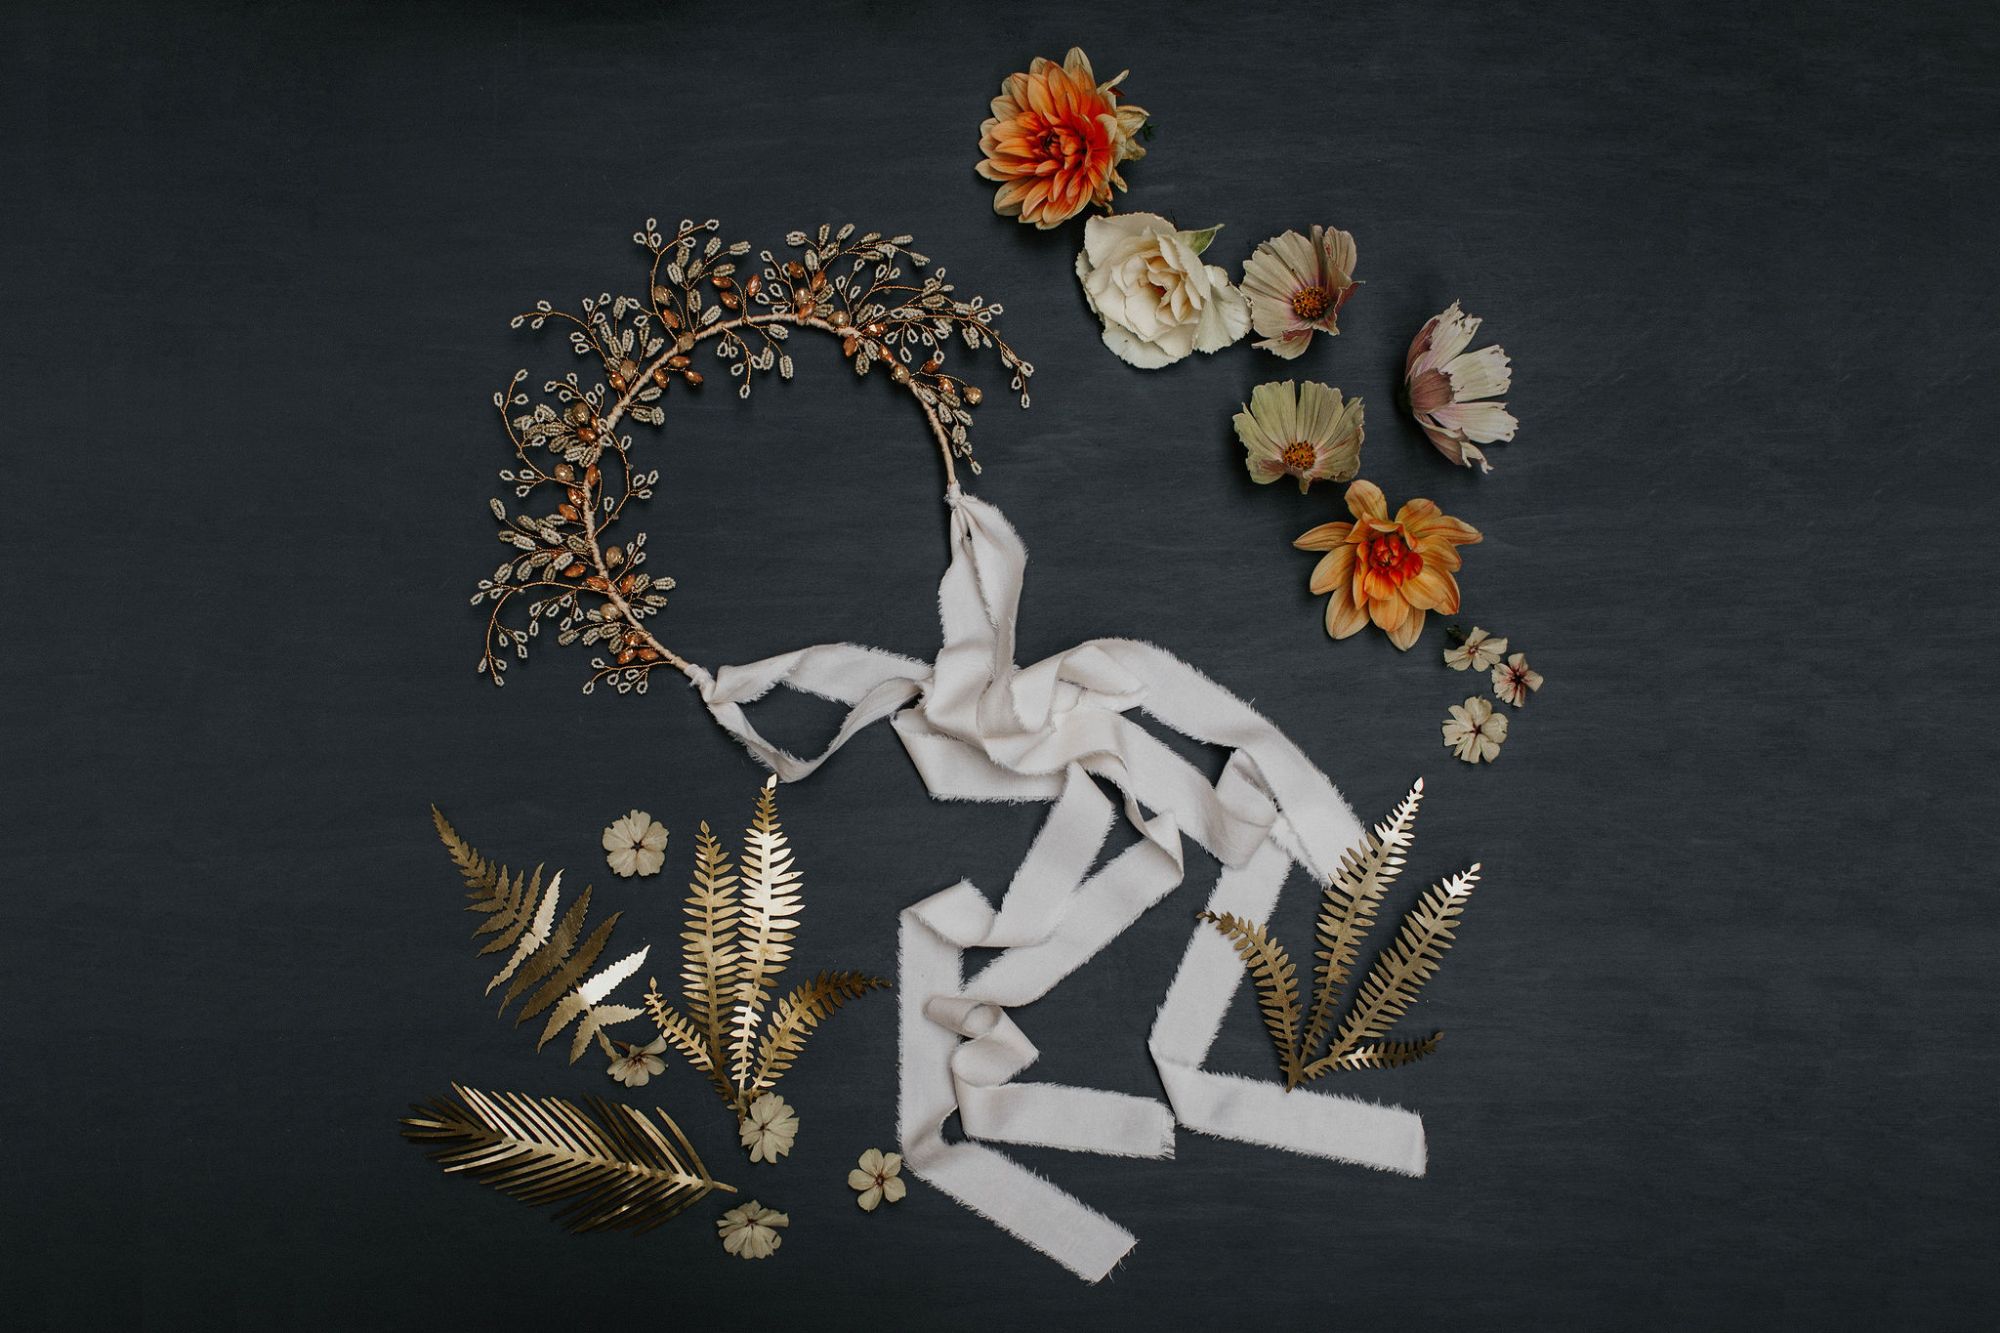 Buy handcrafted wedding headpieces and bridal hair accessories by Clare Lloyd